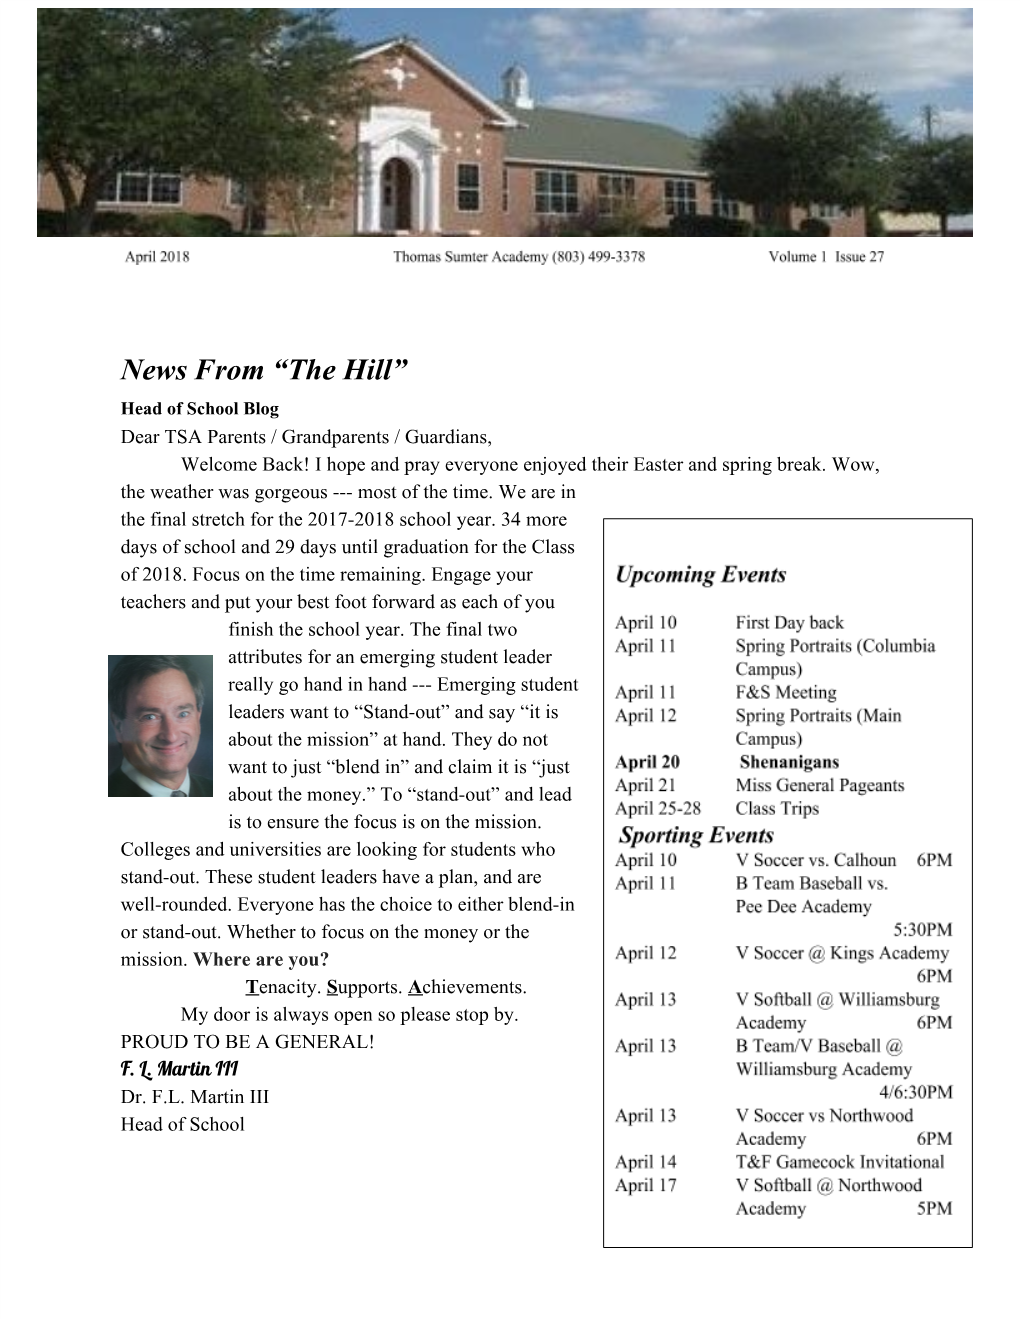 News from “The Hill” Head of School Blog Dear TSA Parents / Grandparents / Guardians, Welcome Back! I Hope and Pray Everyone Enjoyed Their Easter and Spring Break